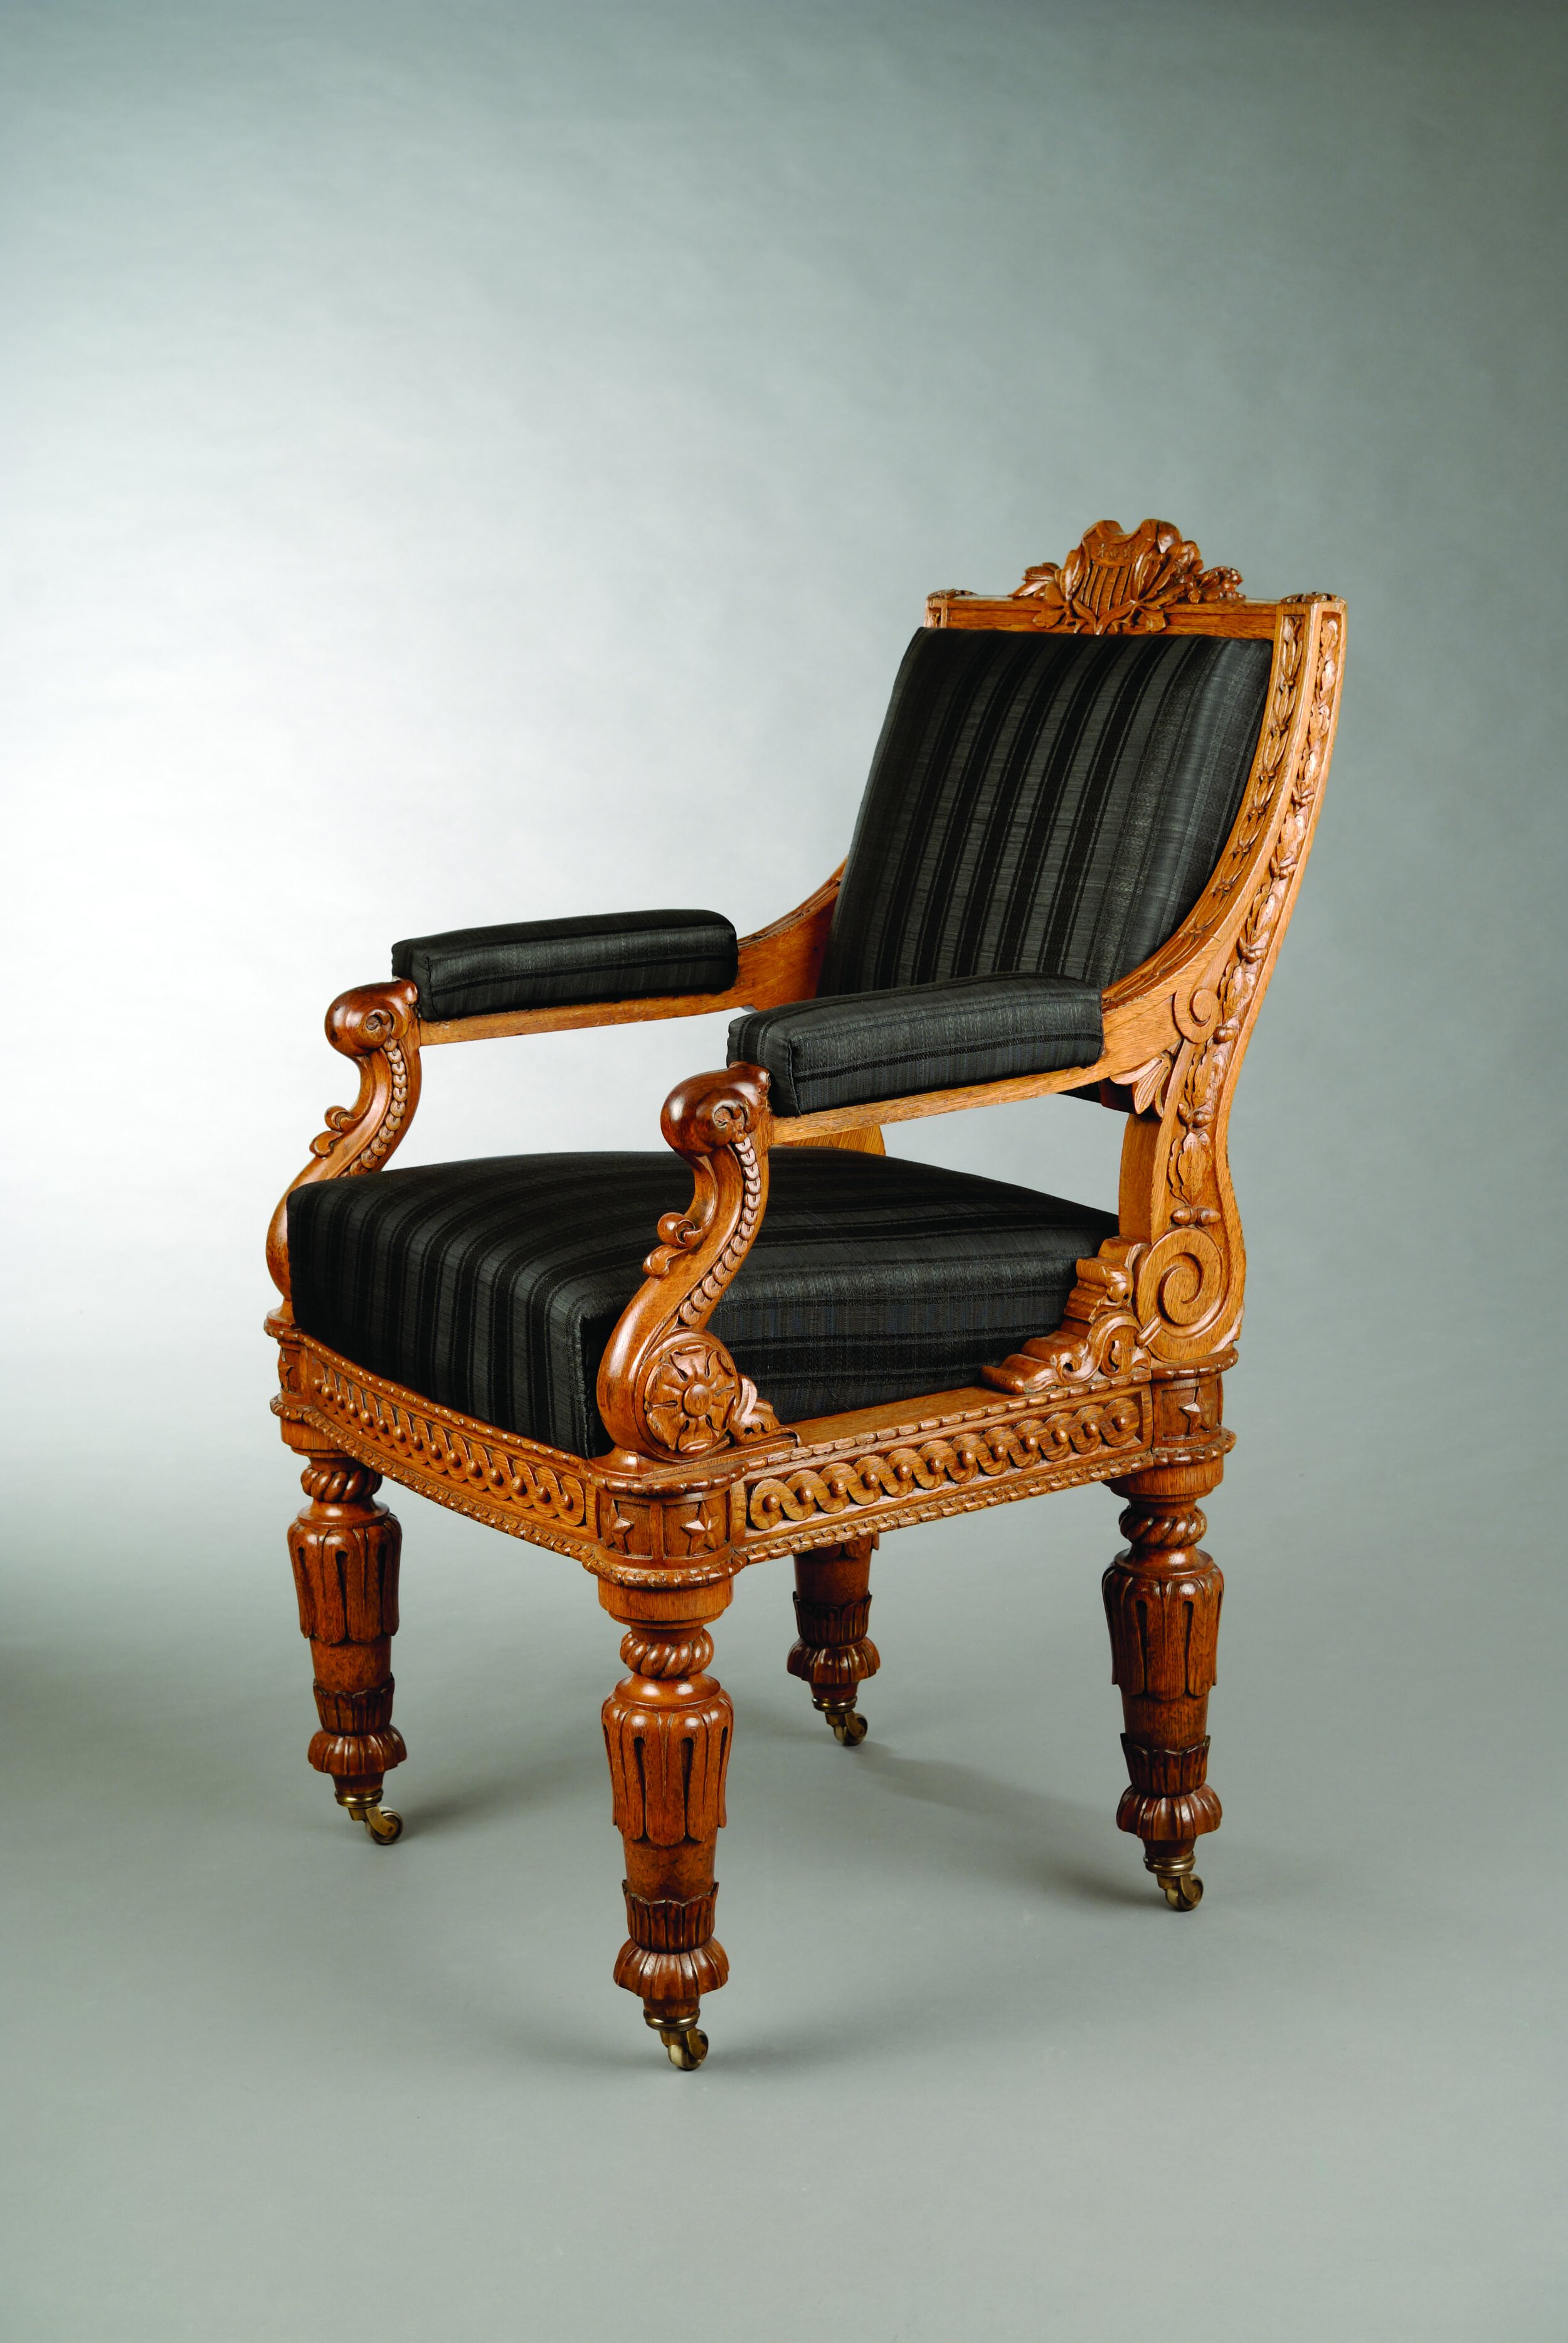 House of Representatives Chamber Arm Chair, 1857